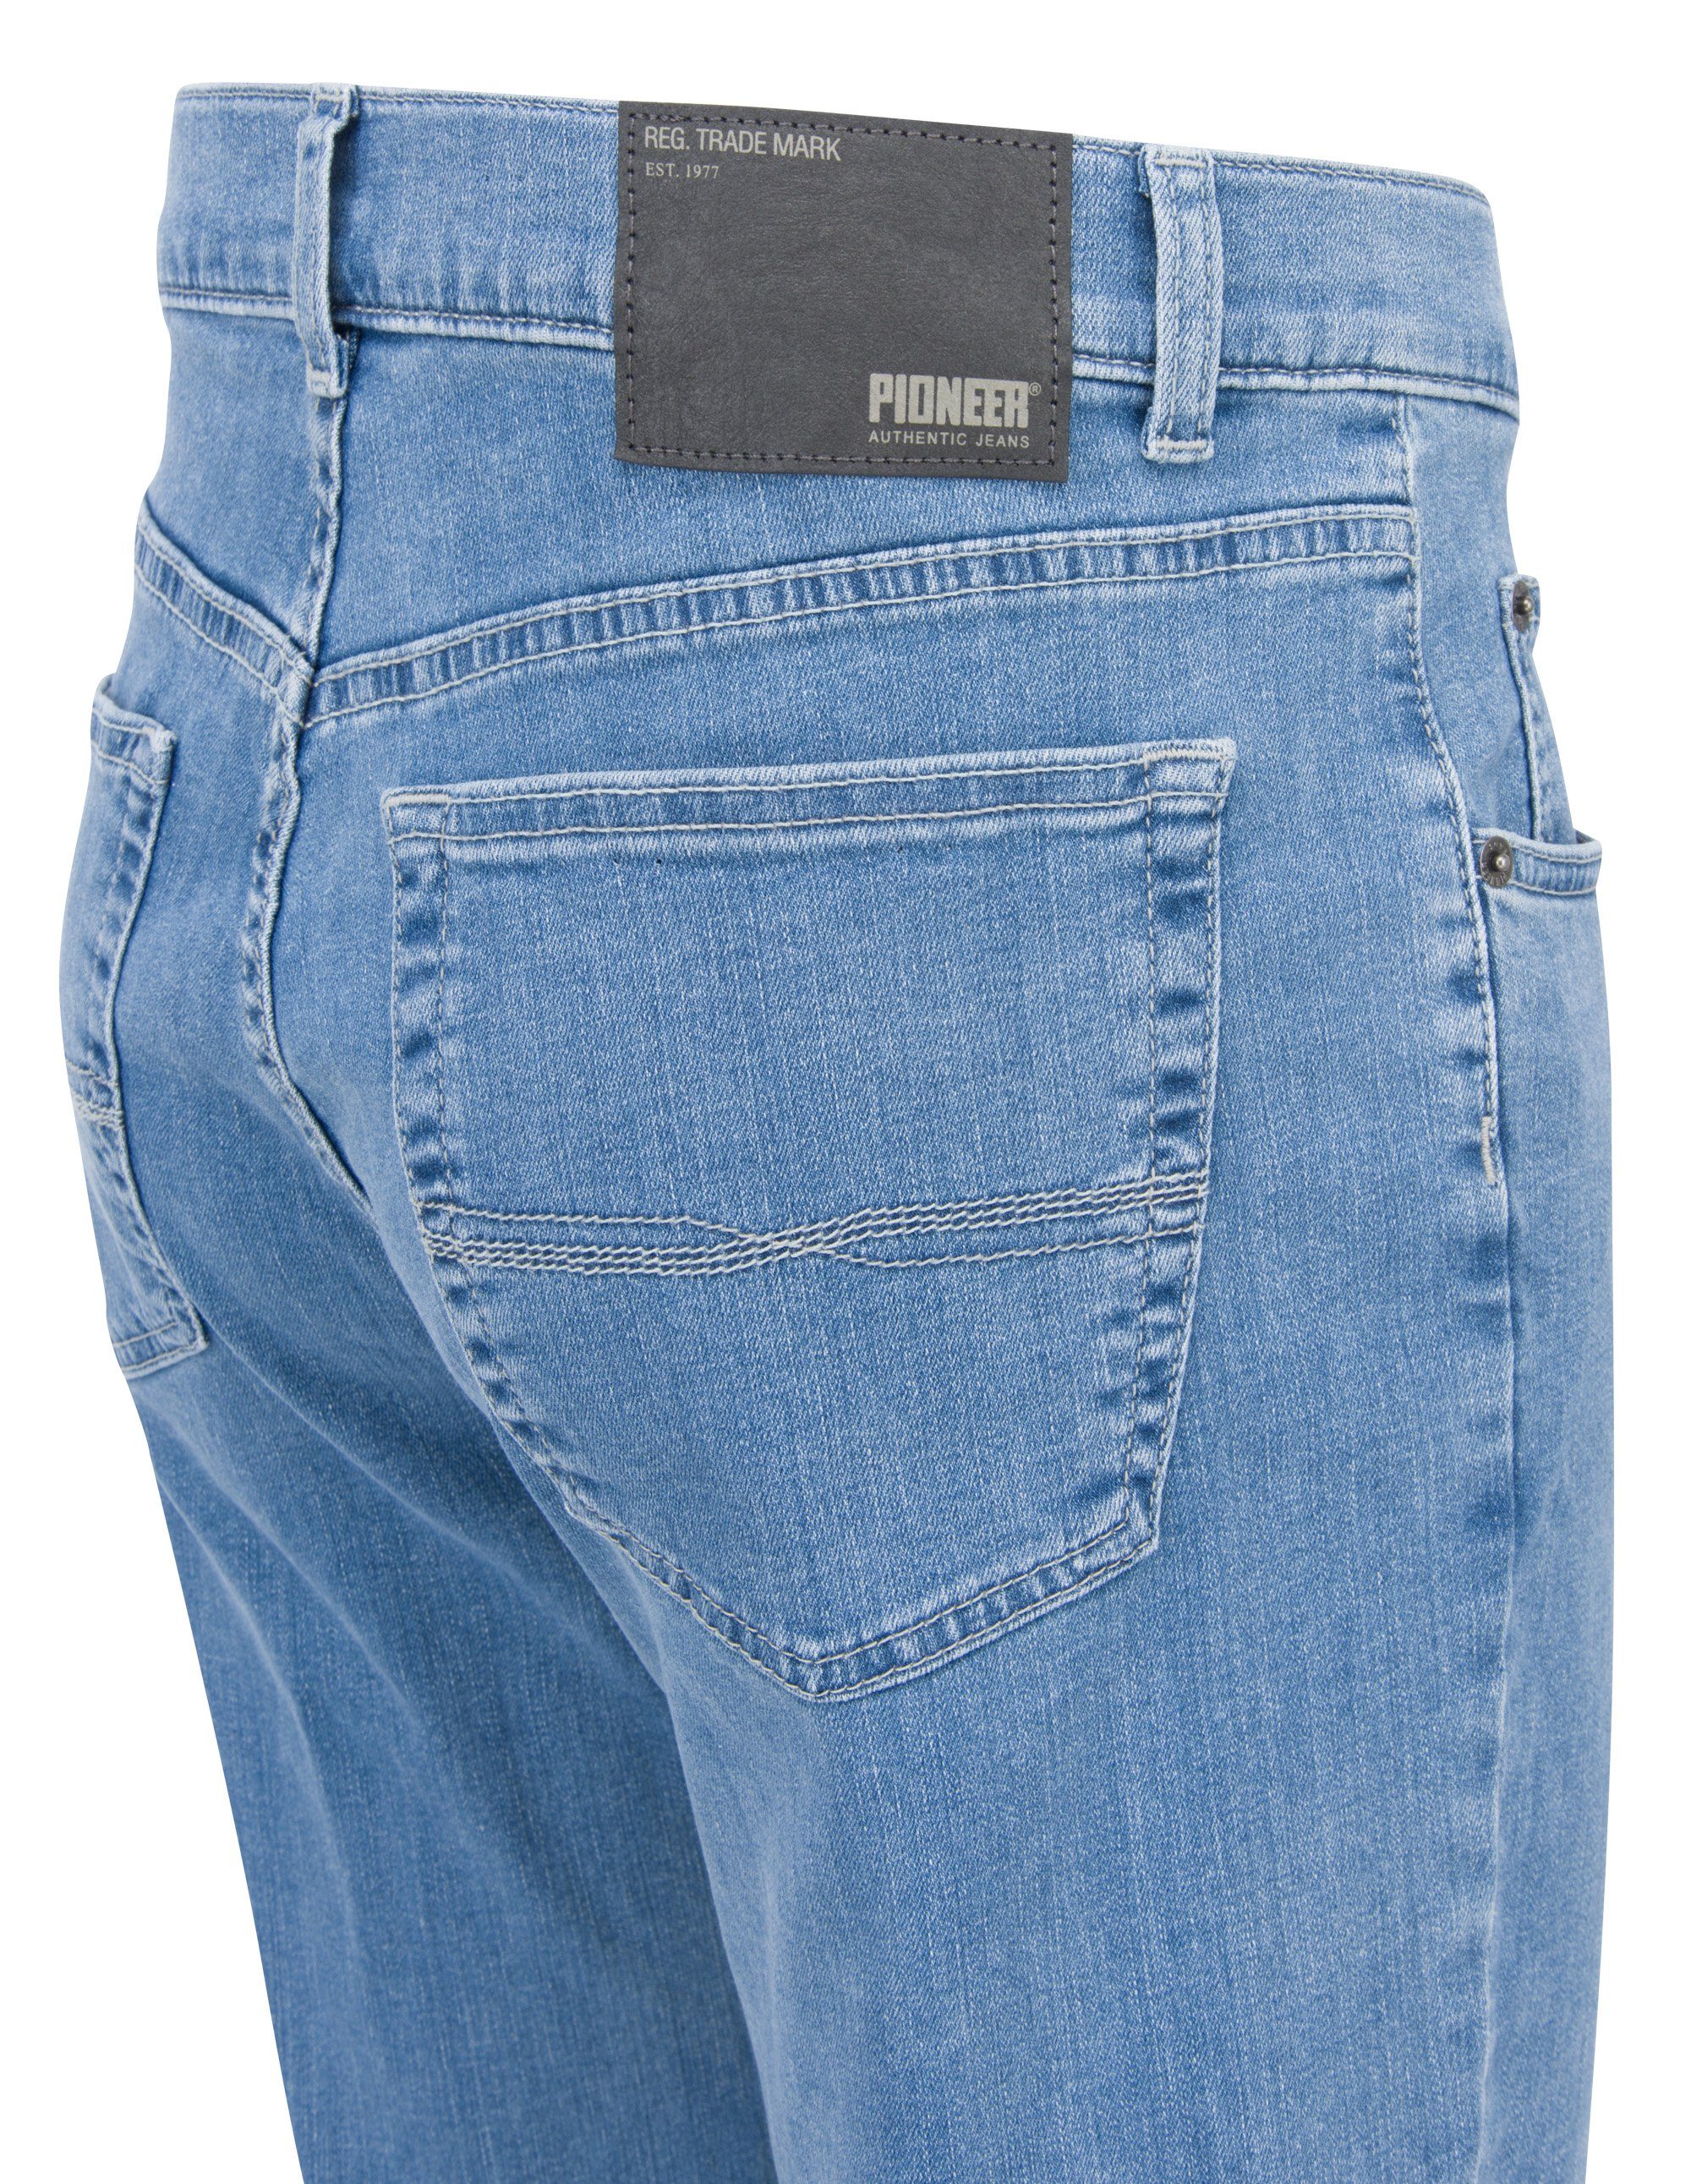 Jeans PIONEER Authentic 9818.08 5-Pocket-Jeans bleached RON Pioneer 1144